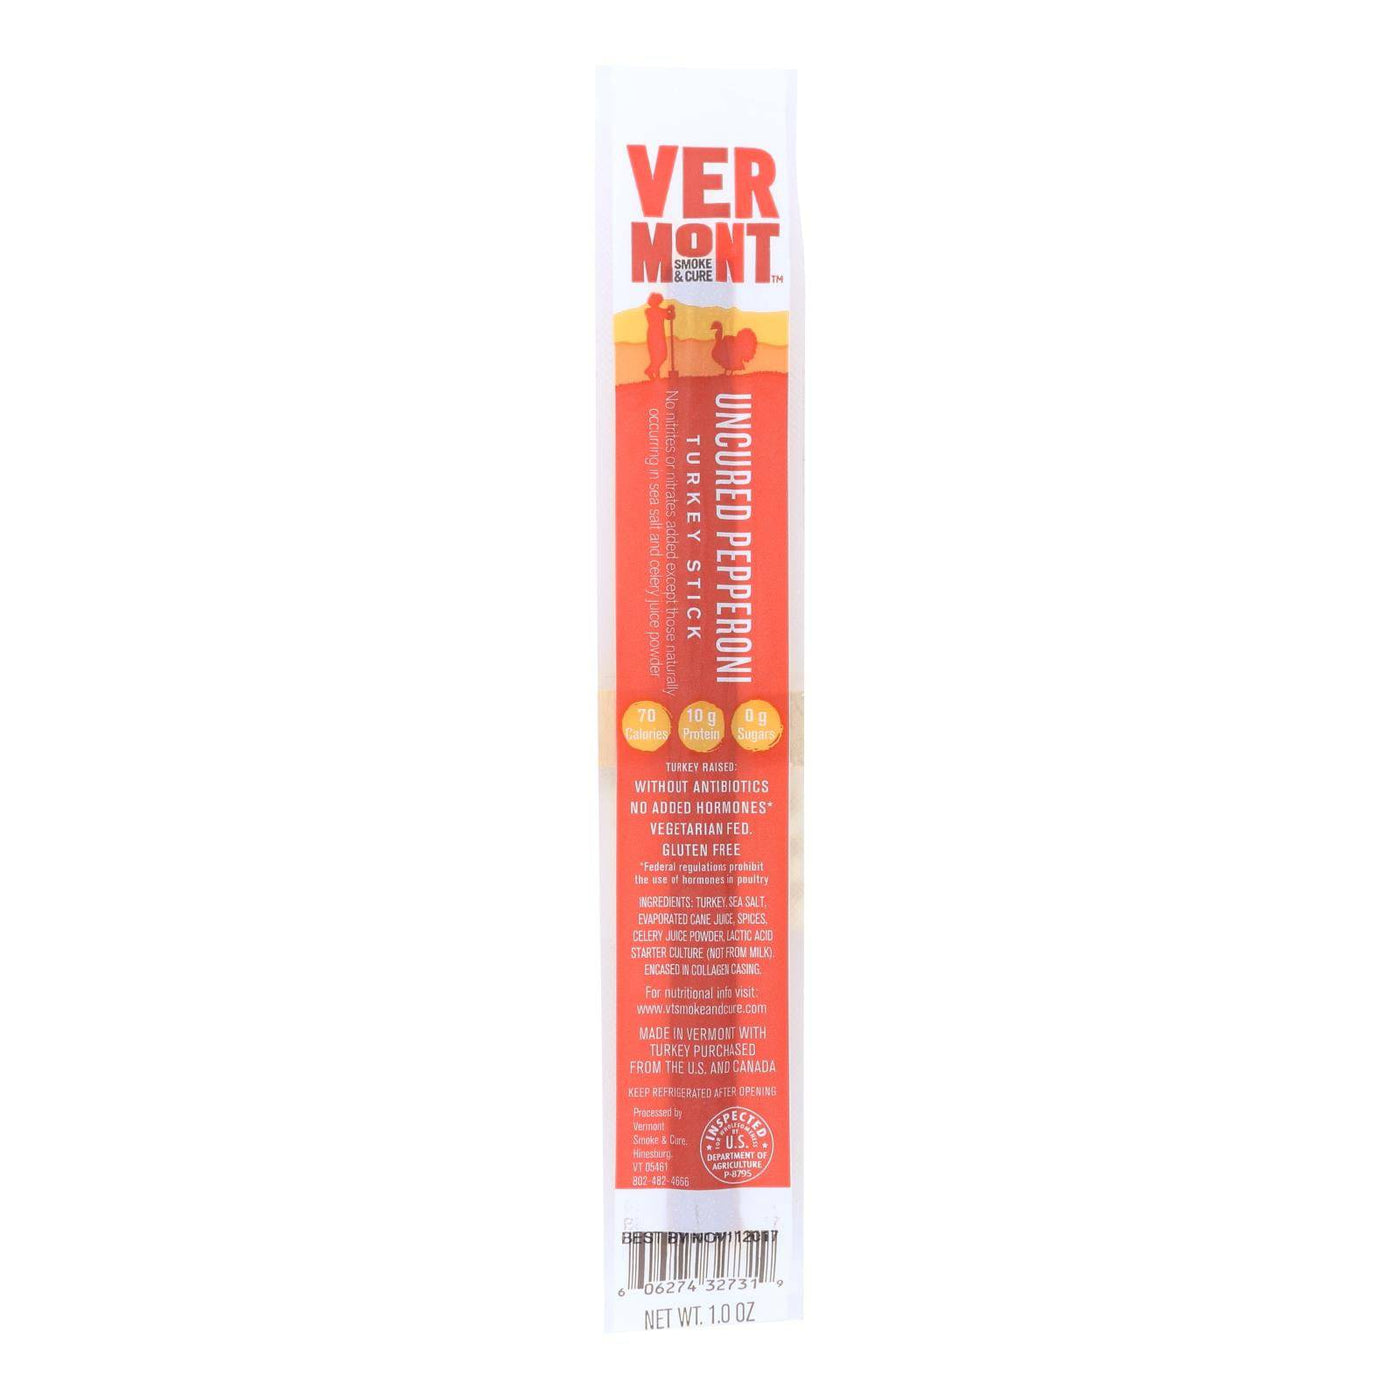 Vermont Smoke And Cure Realsticks - Turkey Pepperoni - 1 Oz - Case Of 24 | OnlyNaturals.us